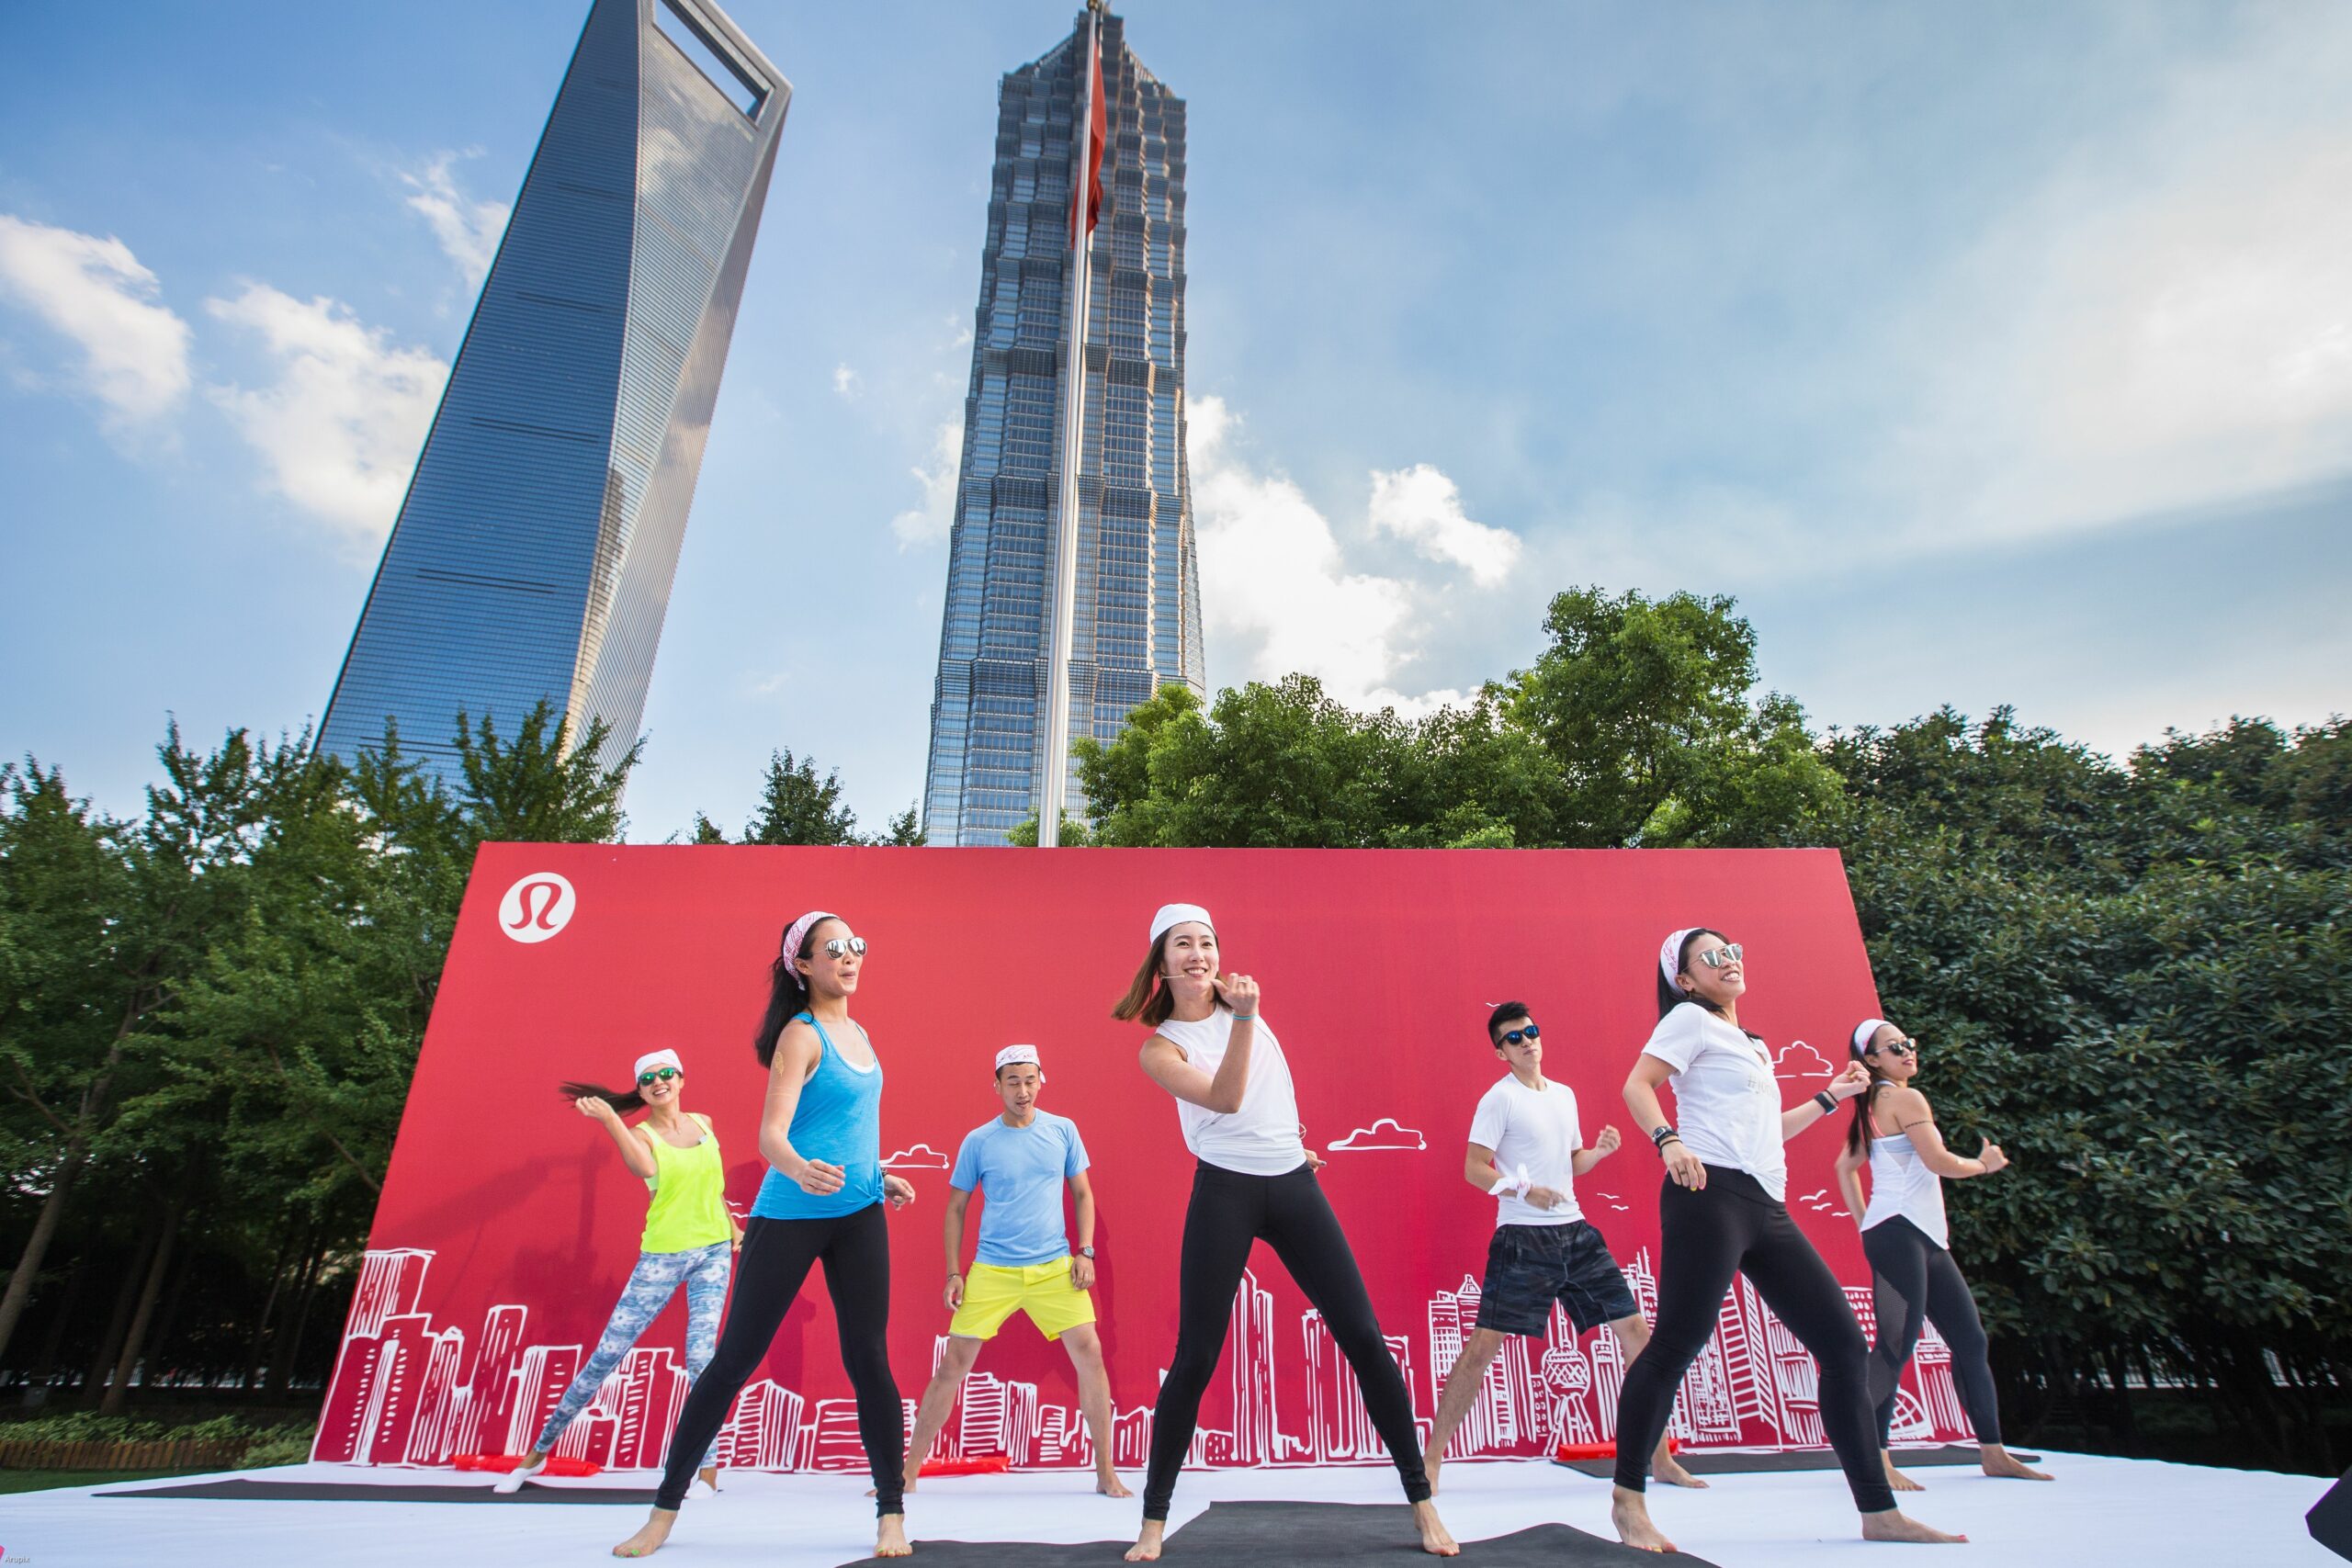 The Popularity of Wellness Brands in China: the Lululemon case